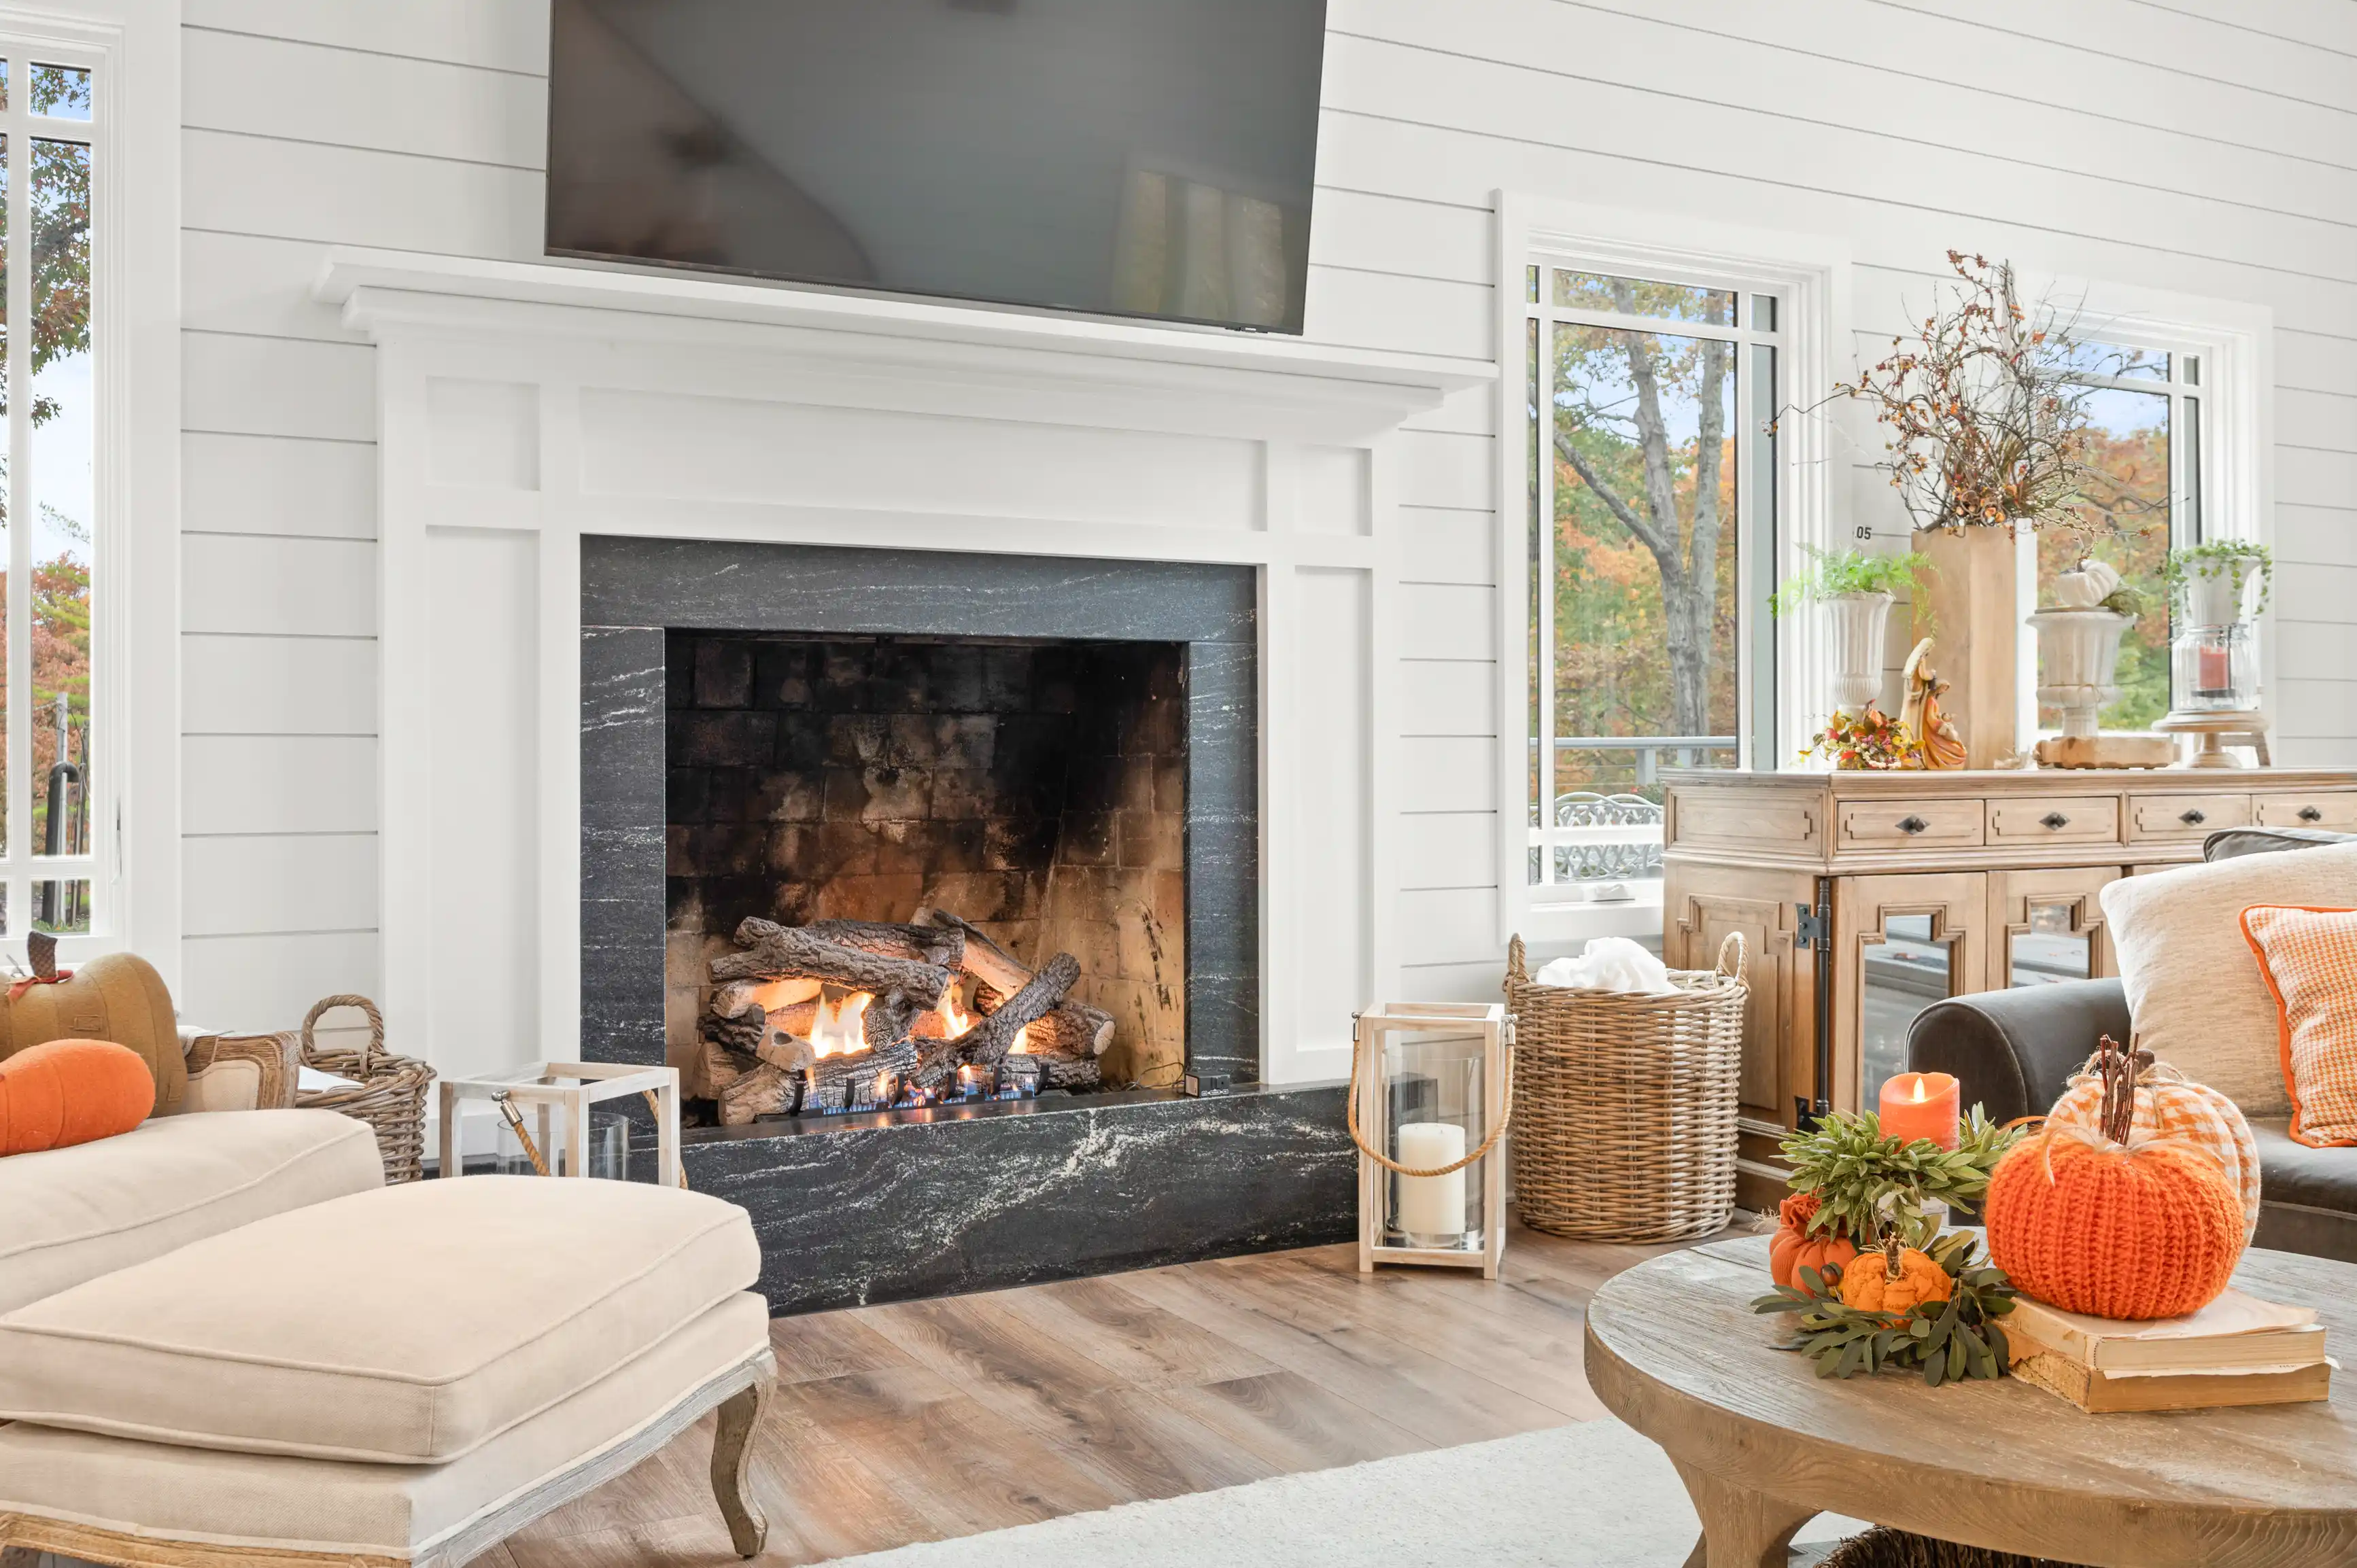 Cozy living room with a lit fireplace, a beige sofa with orange pillows, wooden furniture, autumn decorations, and a view of trees through a window.